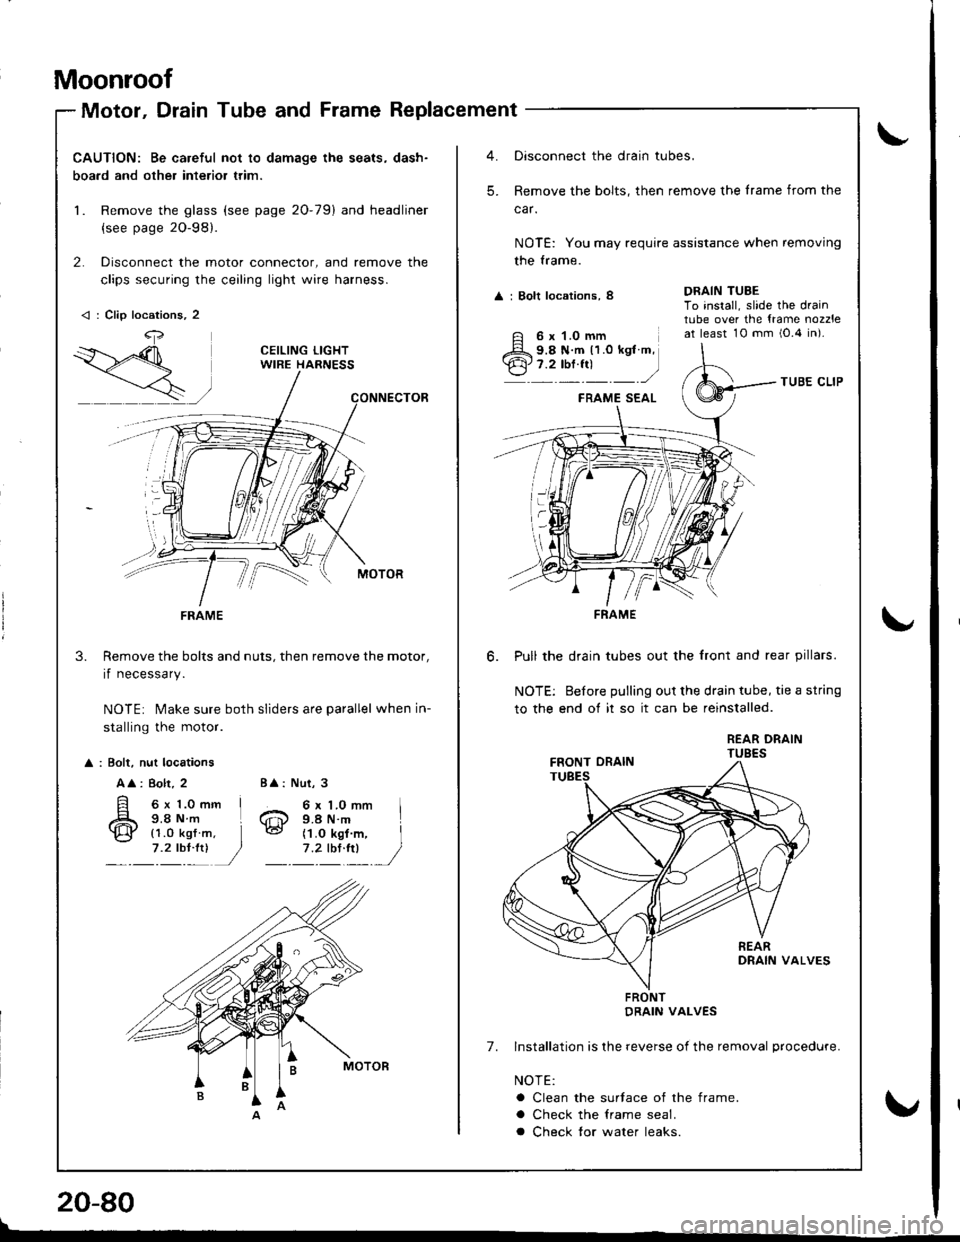 HONDA INTEGRA 1998 4.G Workshop Manual Moonroof
Motor, Drain Tube and Frame Replacement
CAUTION: Be careful not to damage the seats, dash-
boa.d and other interior trim.
1. Remove the glass (see page 20-79) and headliner
{see page 2O-98}.
